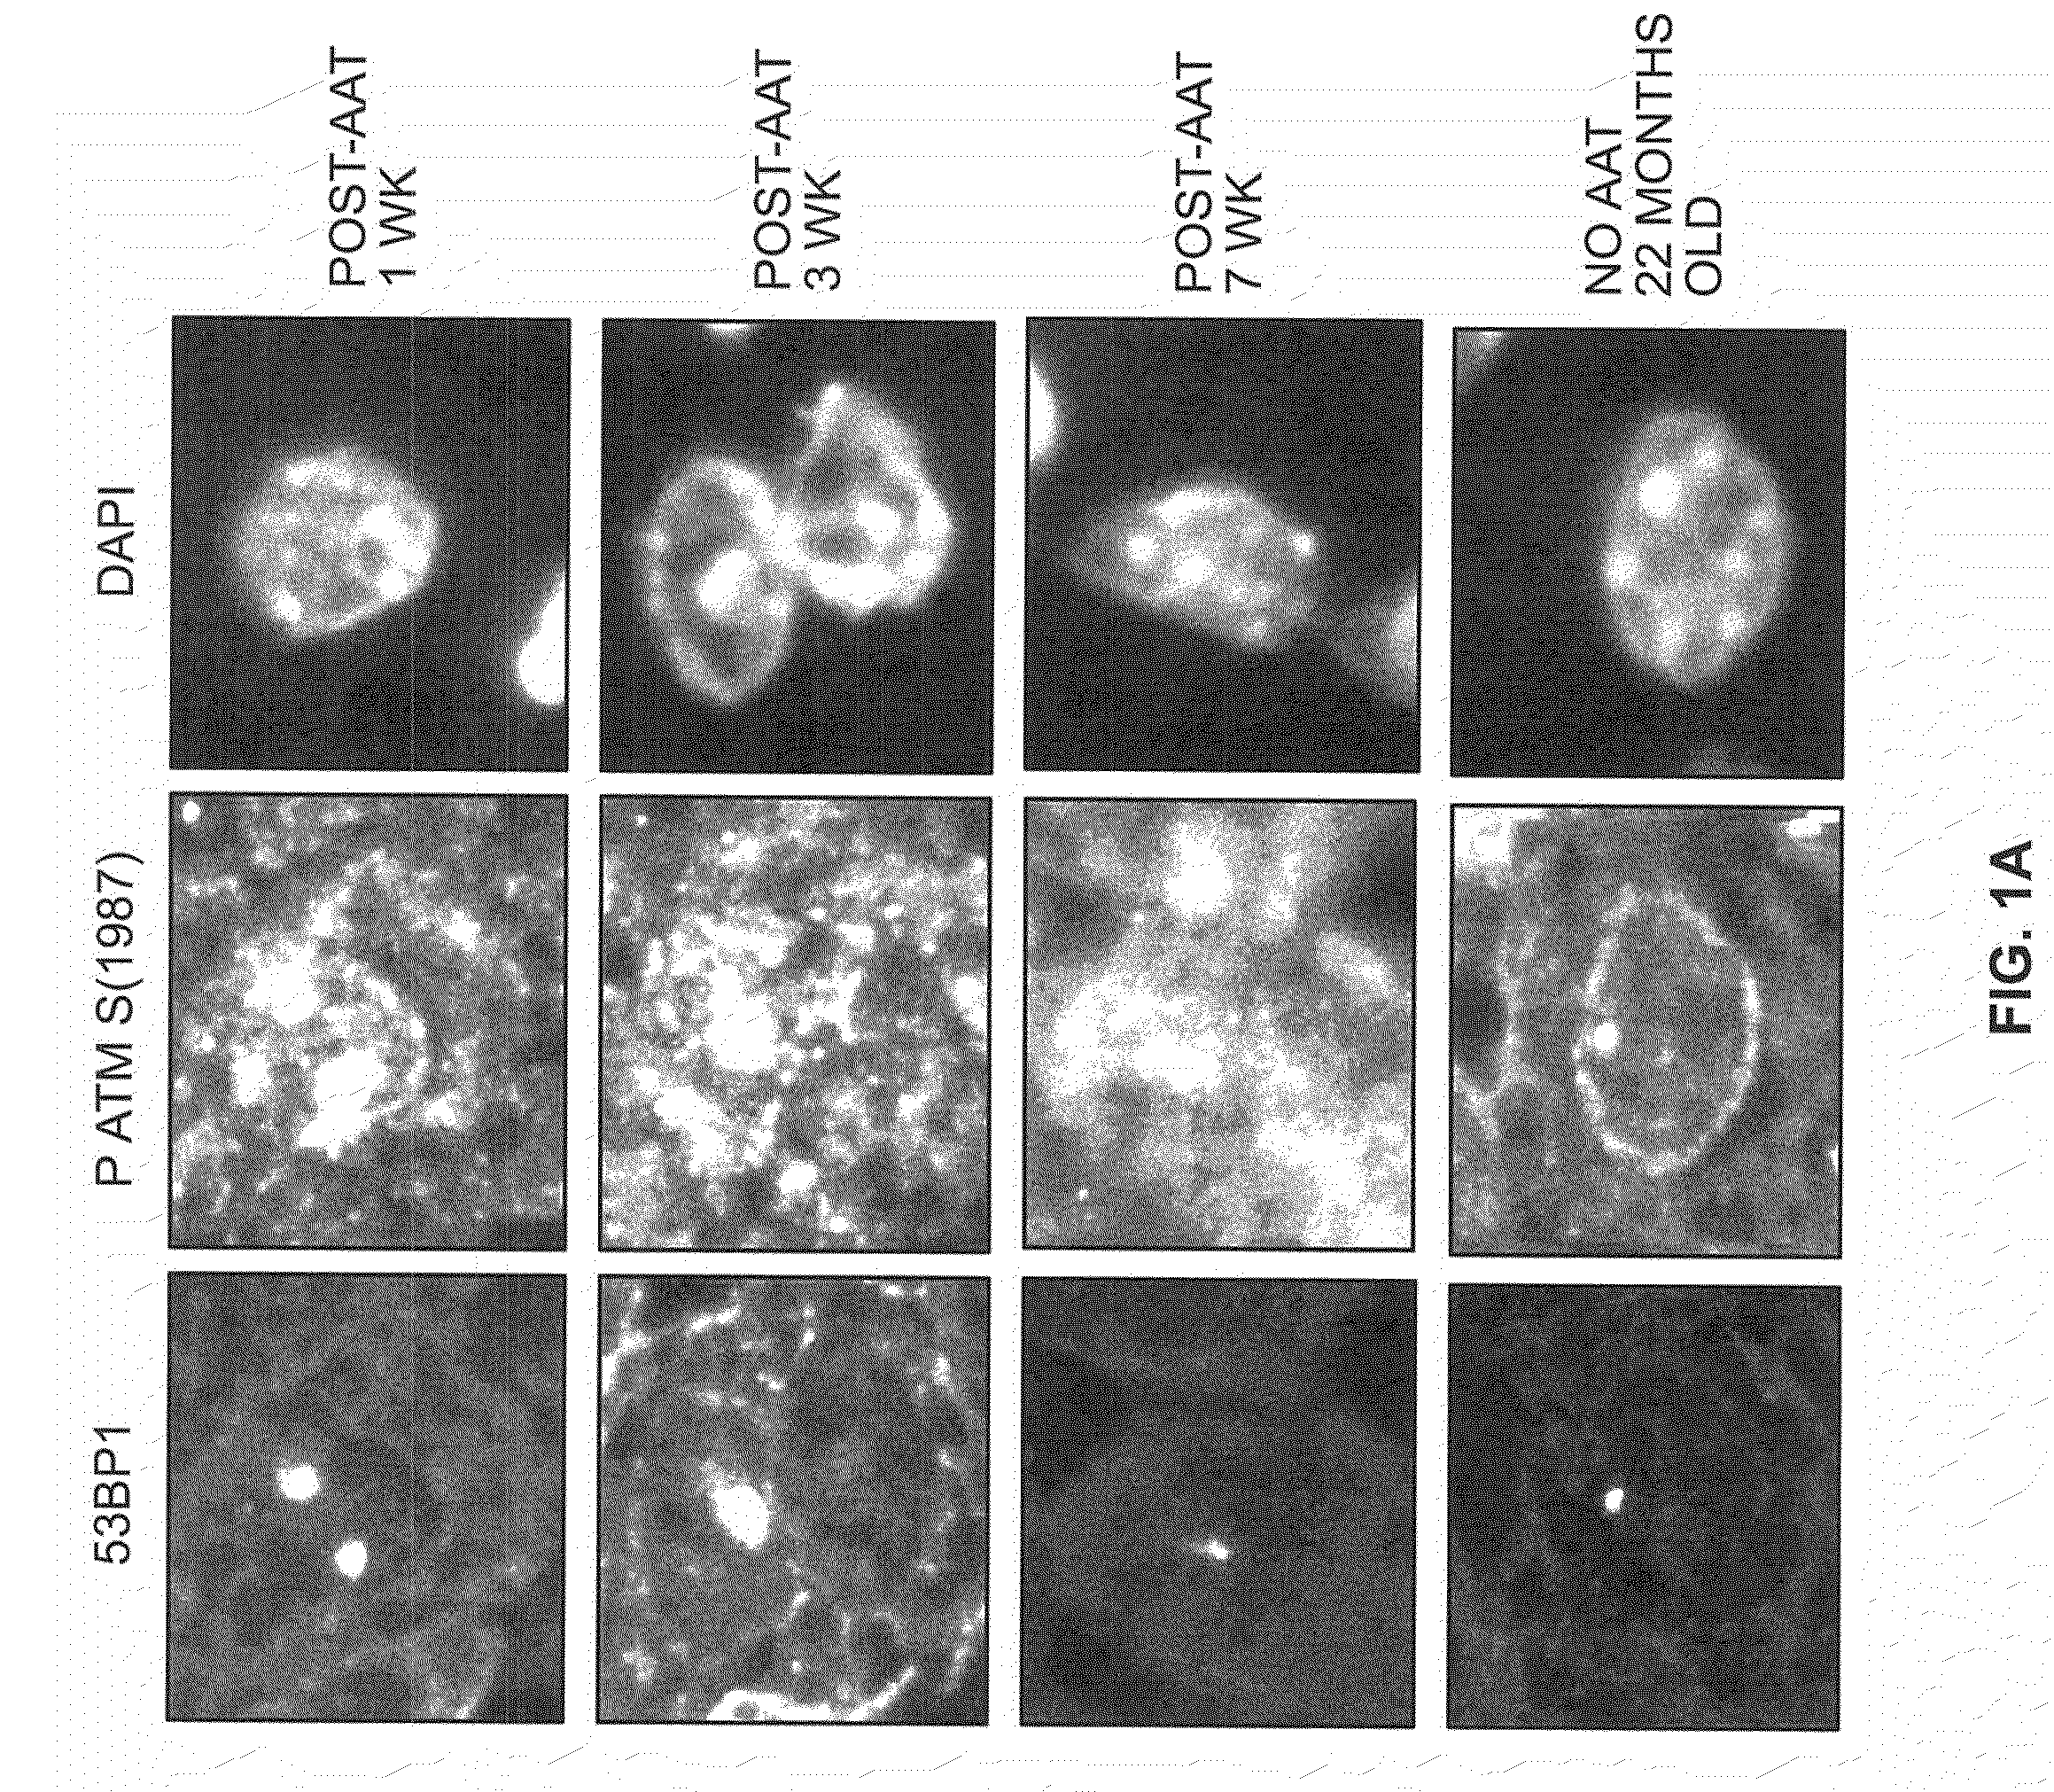 Methods for determining aged based accumulation of senescent cells using senescence specific DNA damage markers